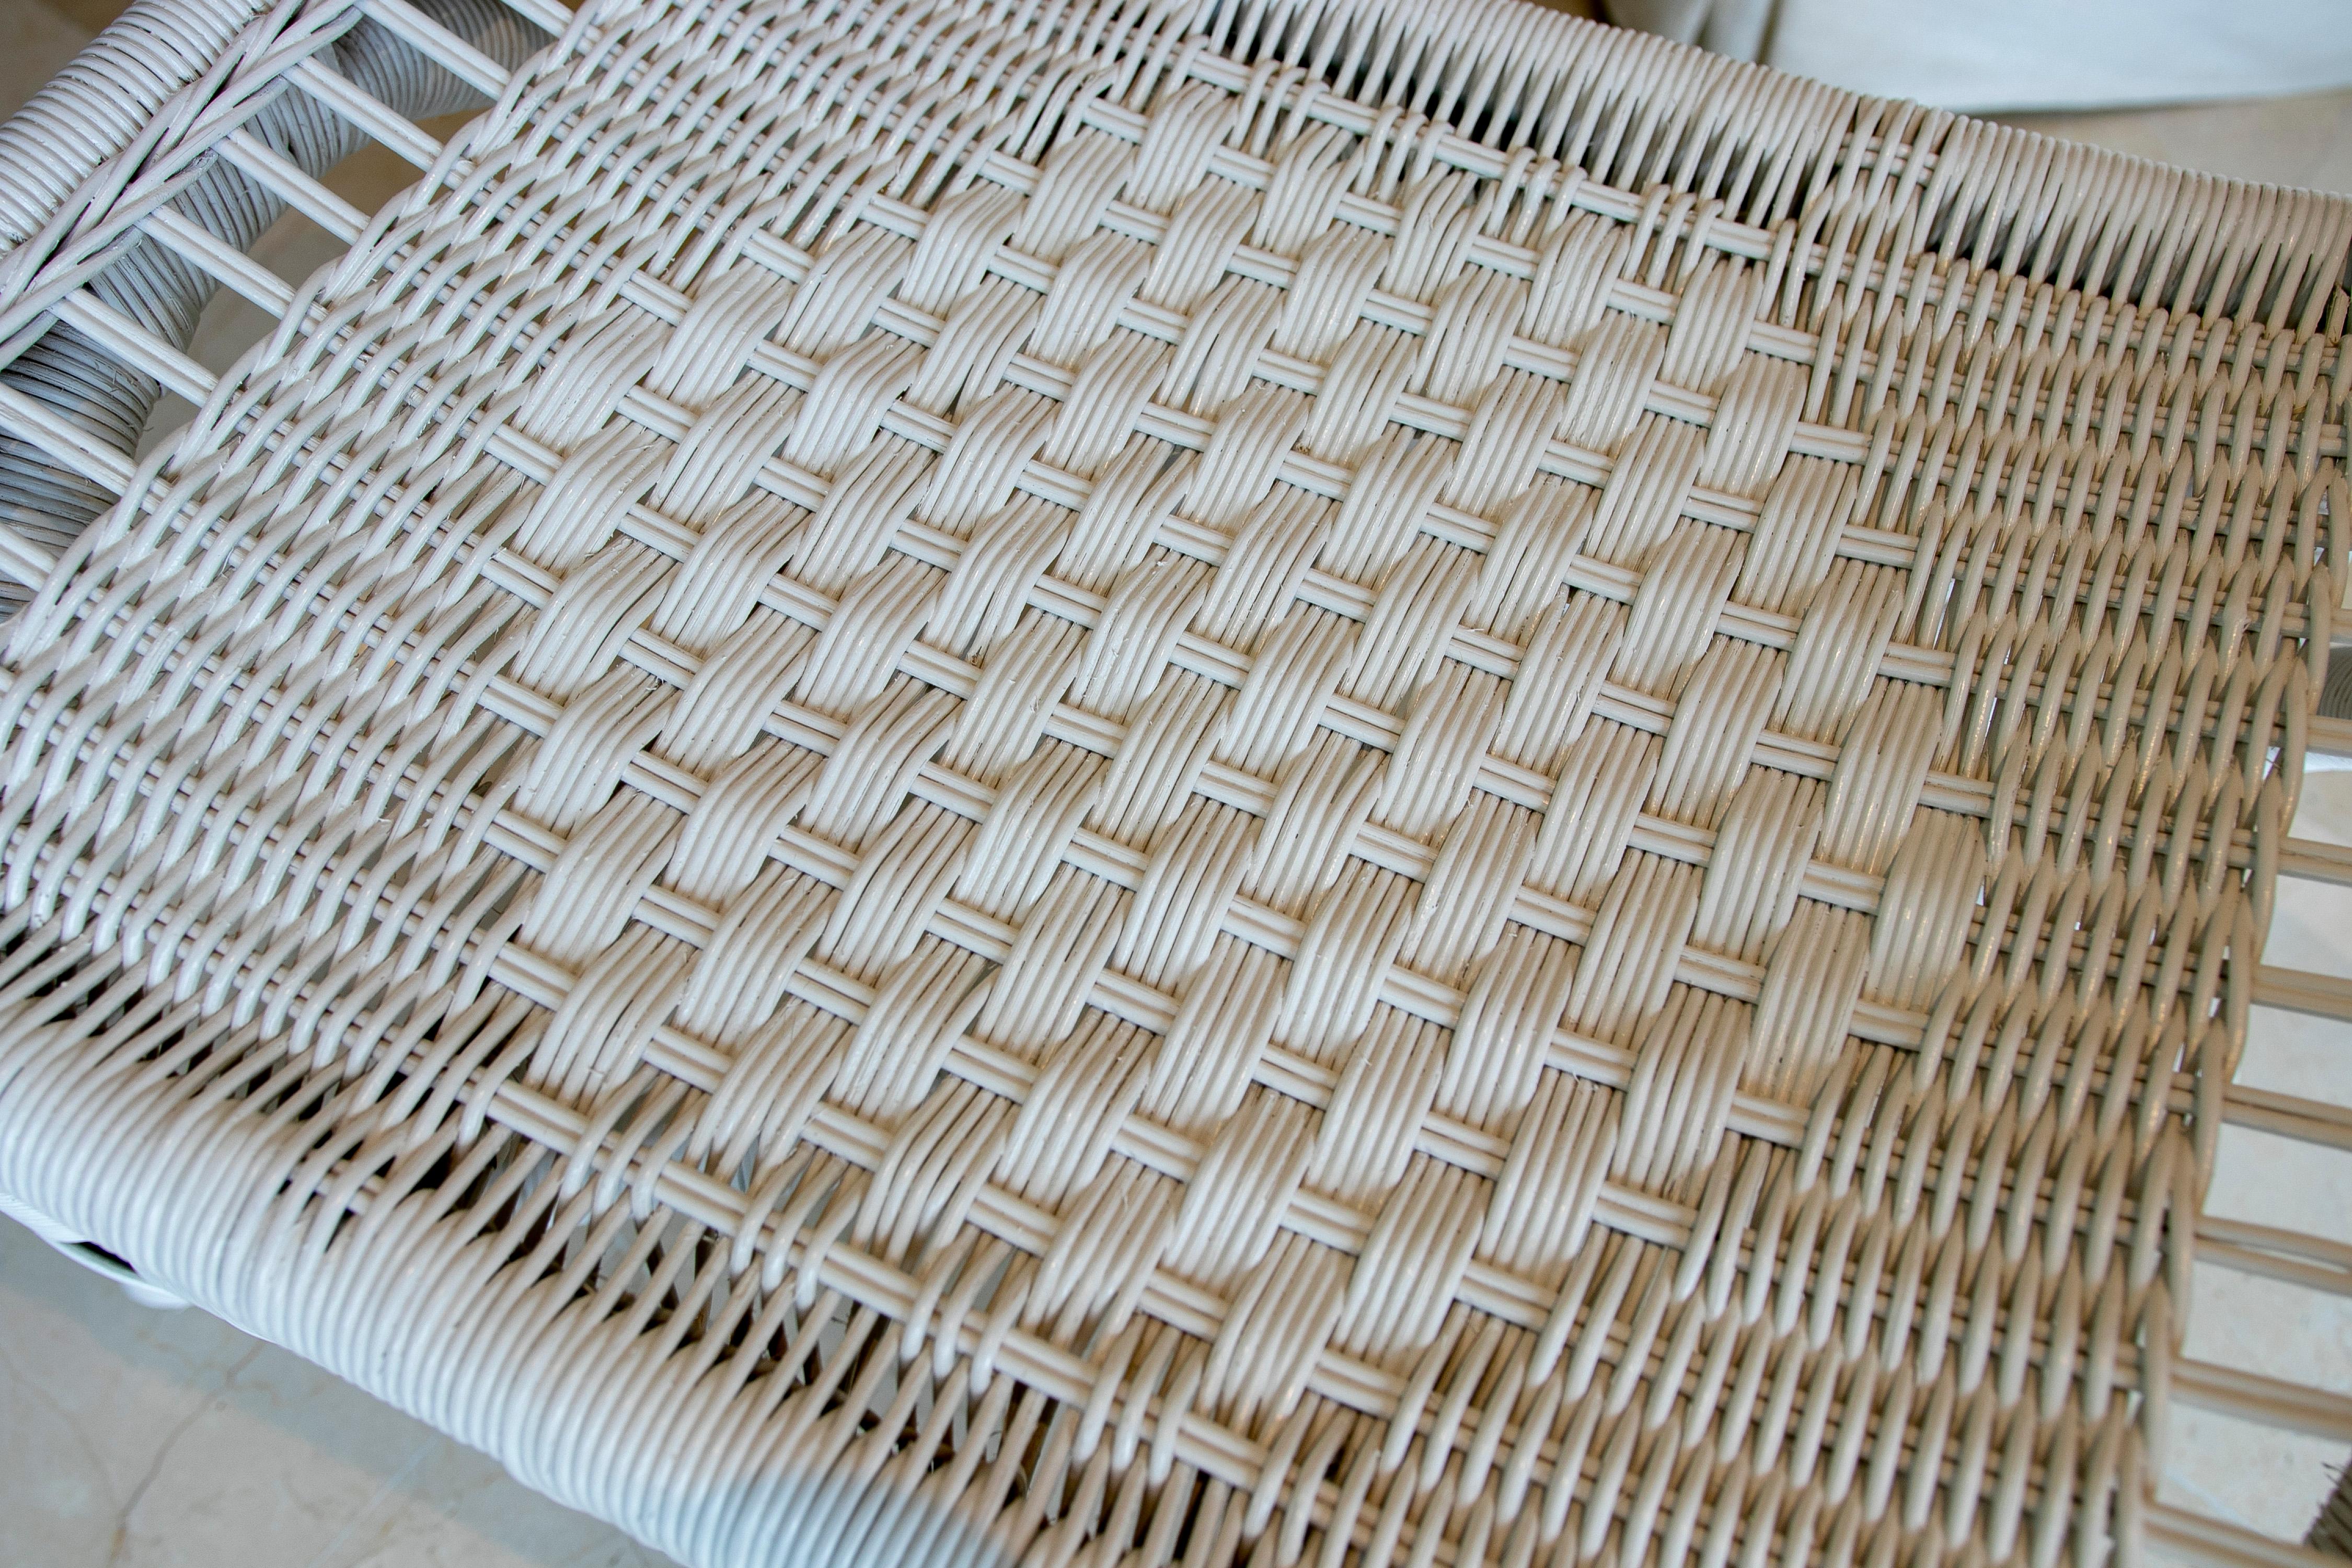 Spanish Handmade Wicker Stool Lacquered in White Colour For Sale 4